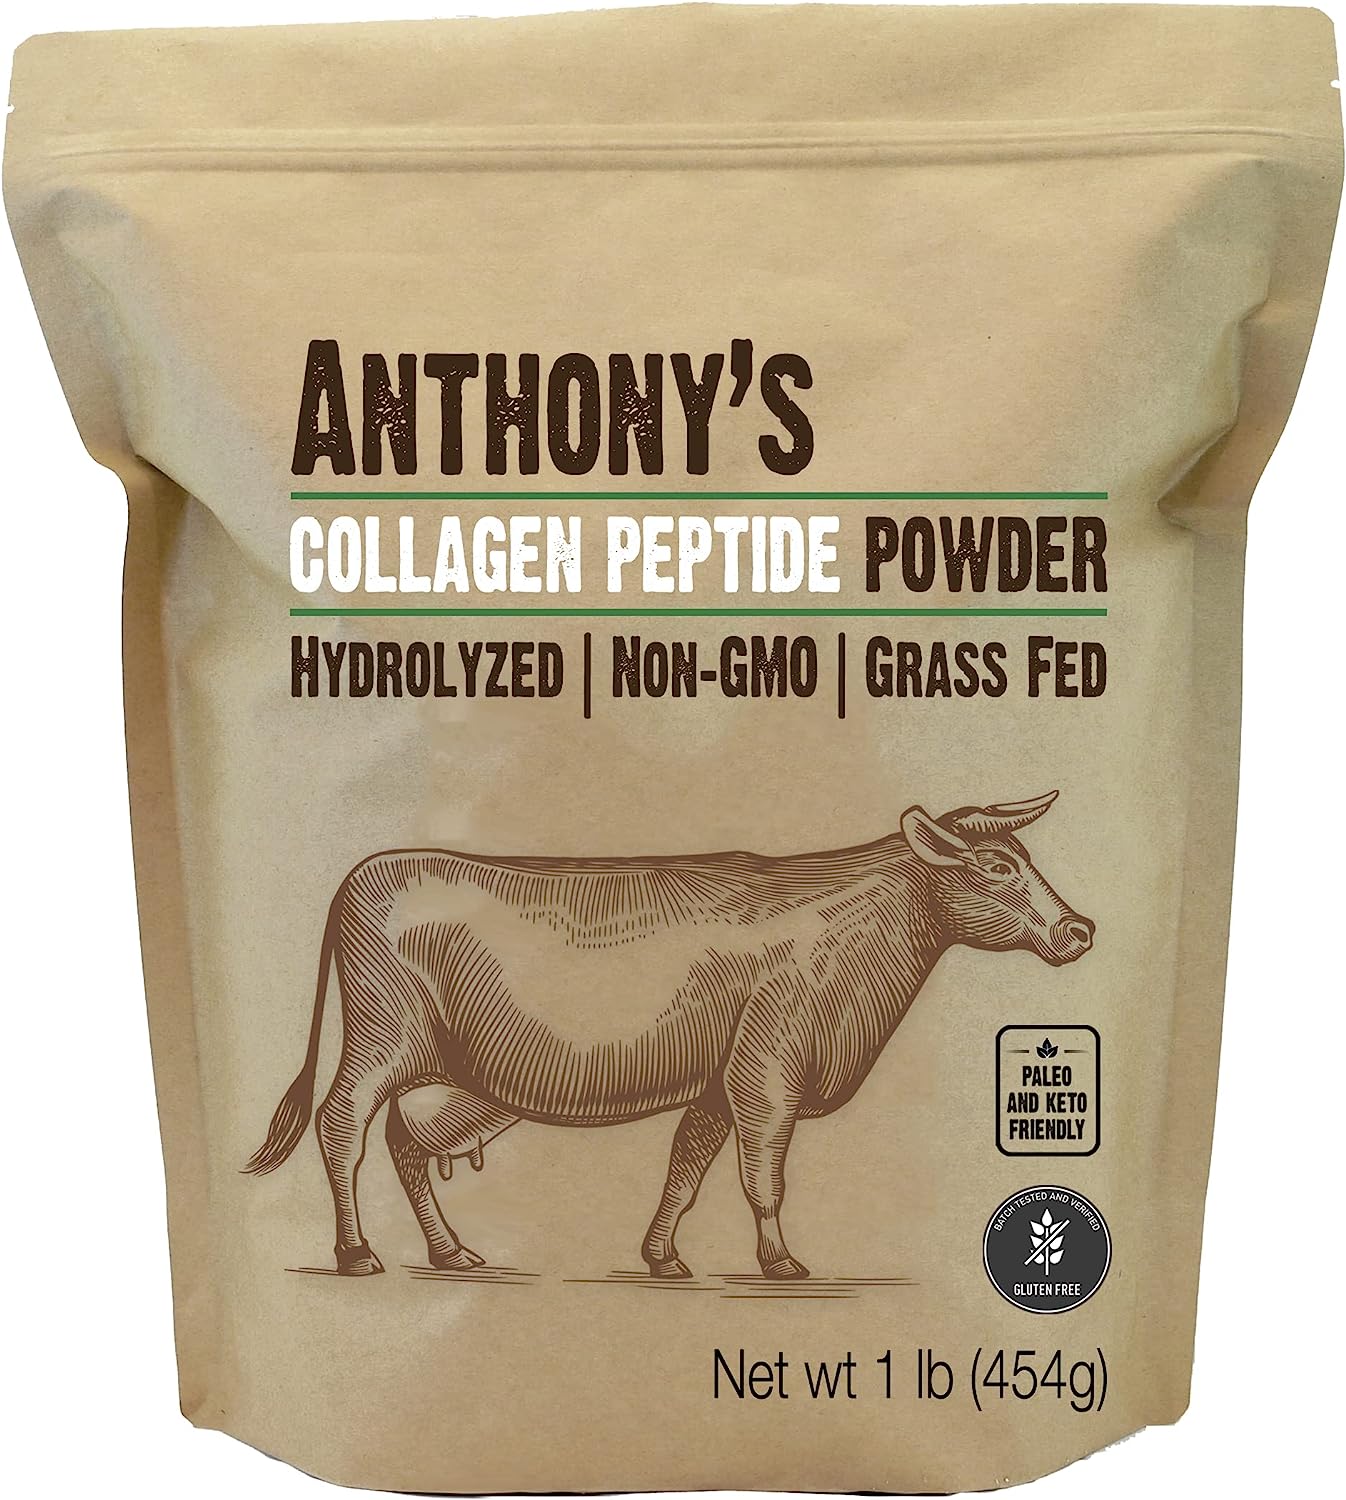 Anthony's Collagen Peptide Powder, 1 lb, Pure Hydrolyzed, Gluten Free, Keto and Paleo Friendly, Grass Fed, Unflavored, Non GMO